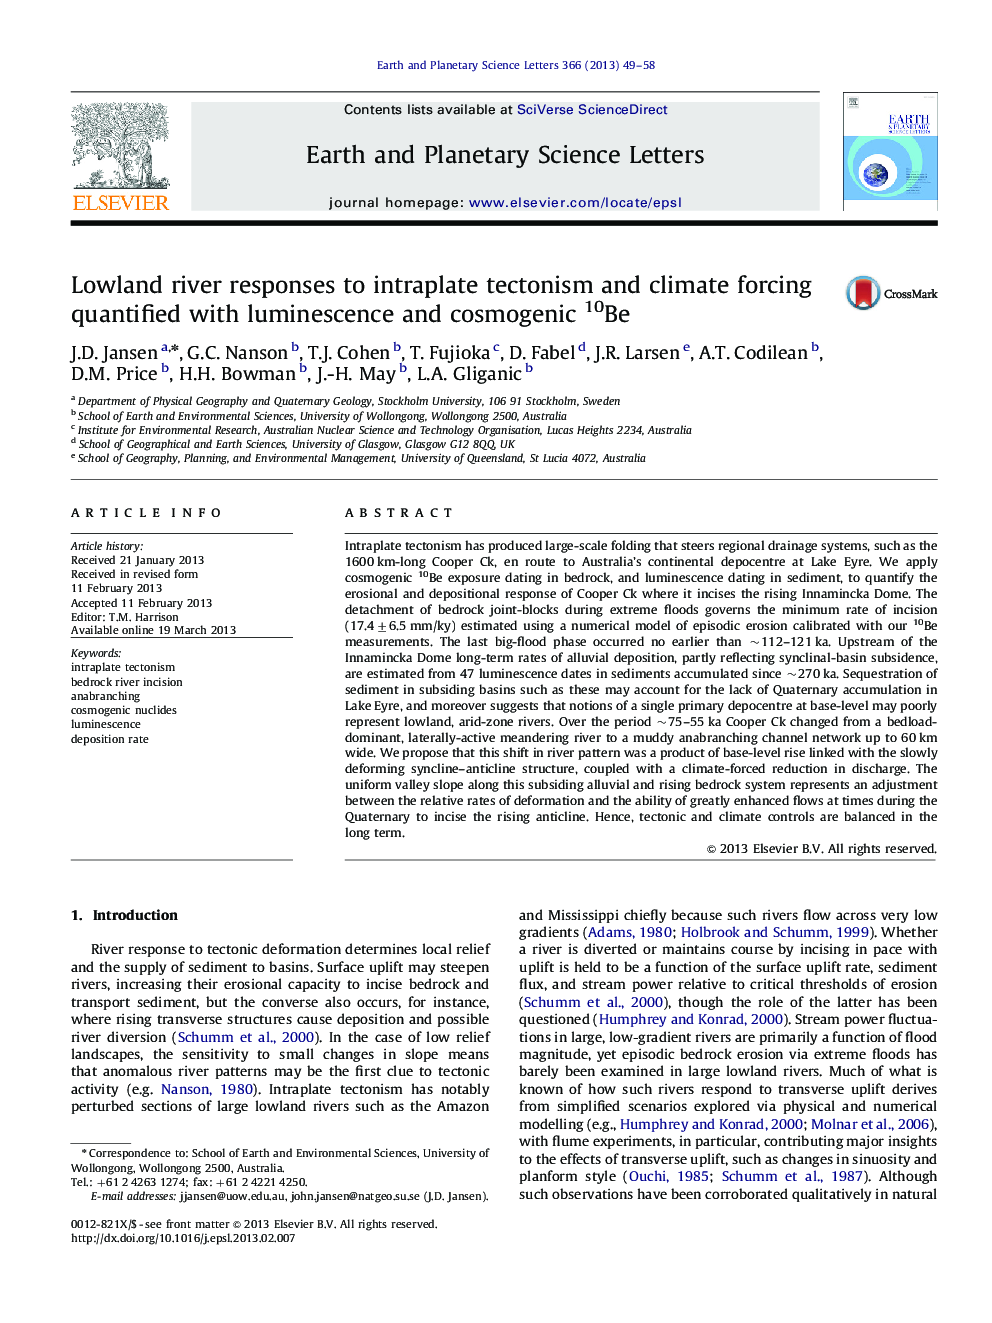 Lowland river responses to intraplate tectonism and climate forcing quantified with luminescence and cosmogenic 10Be